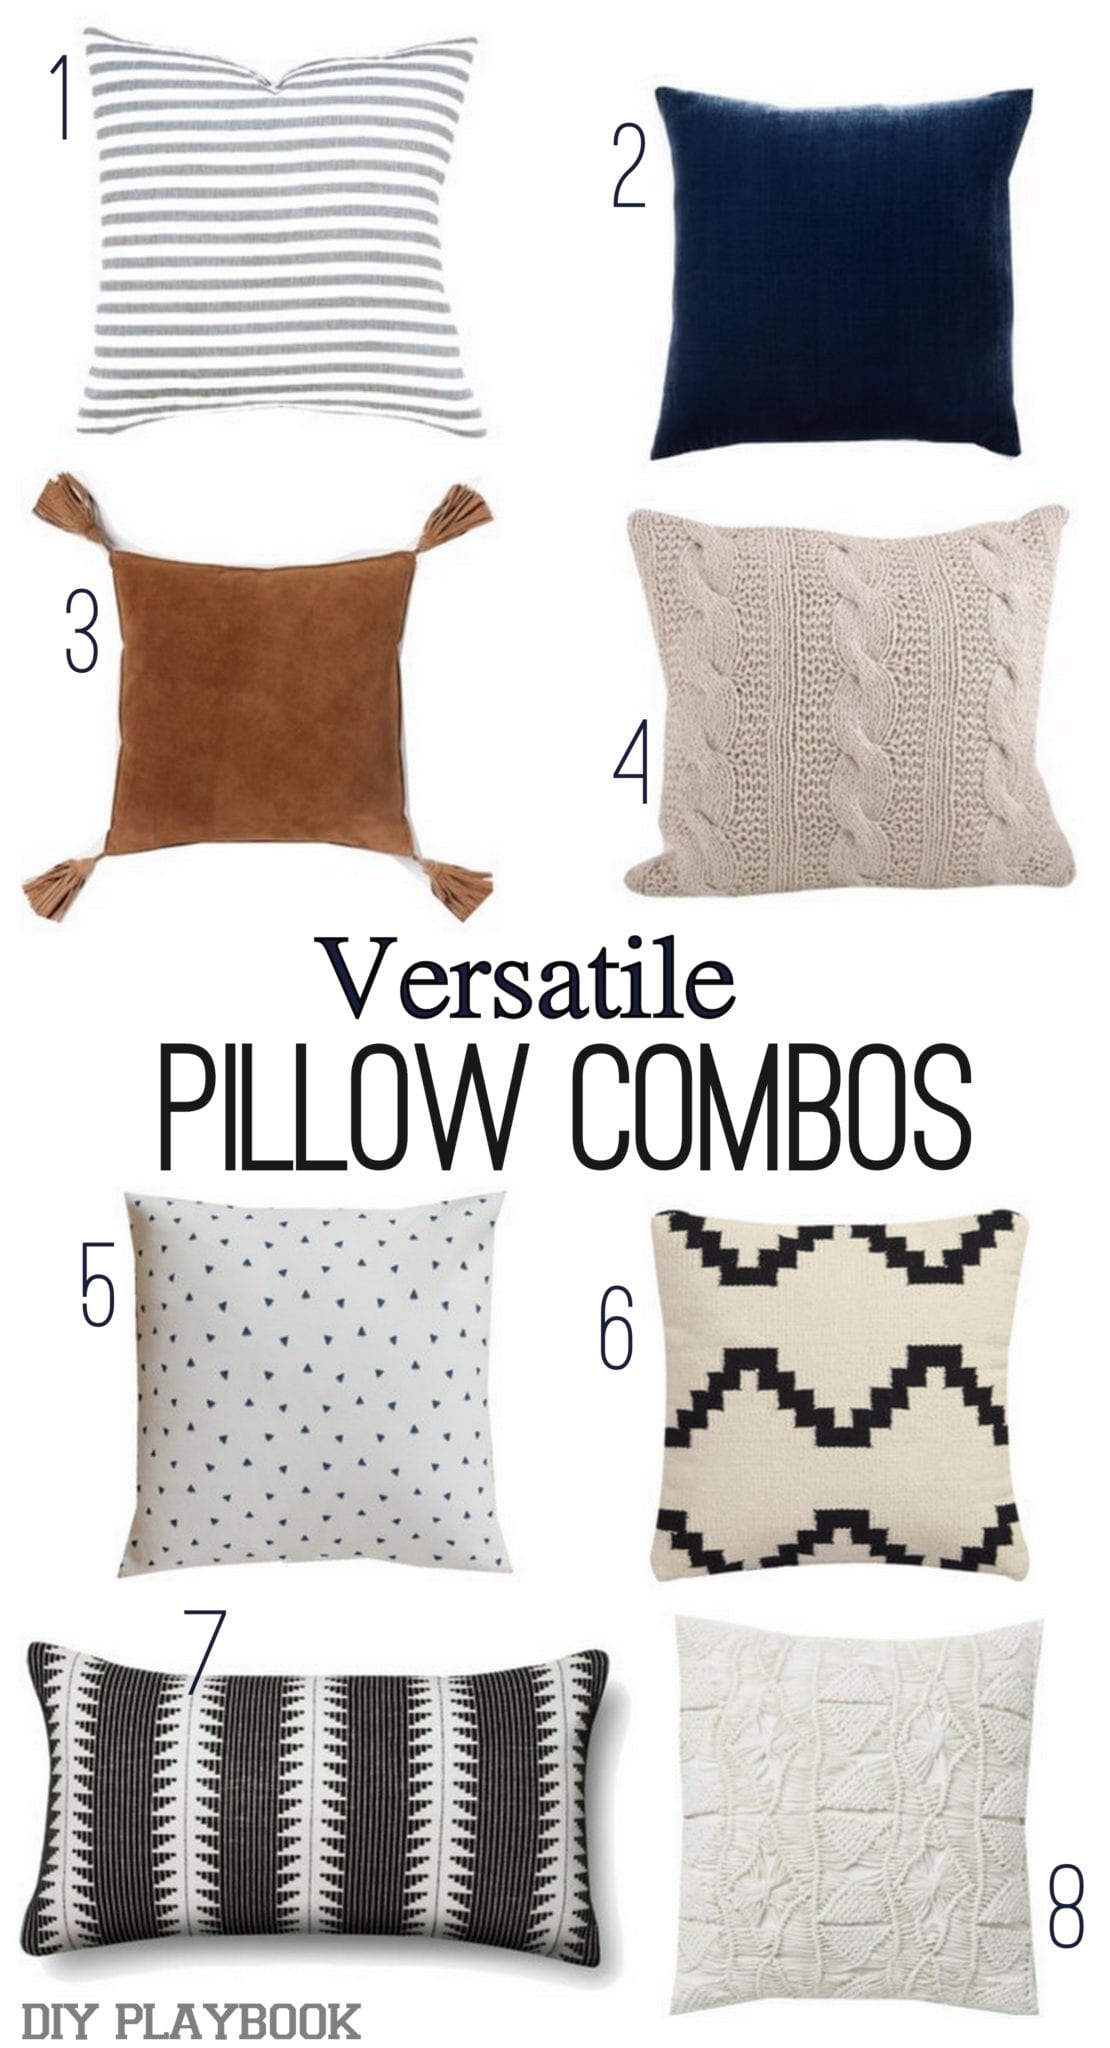 Mix and match pillows for your home